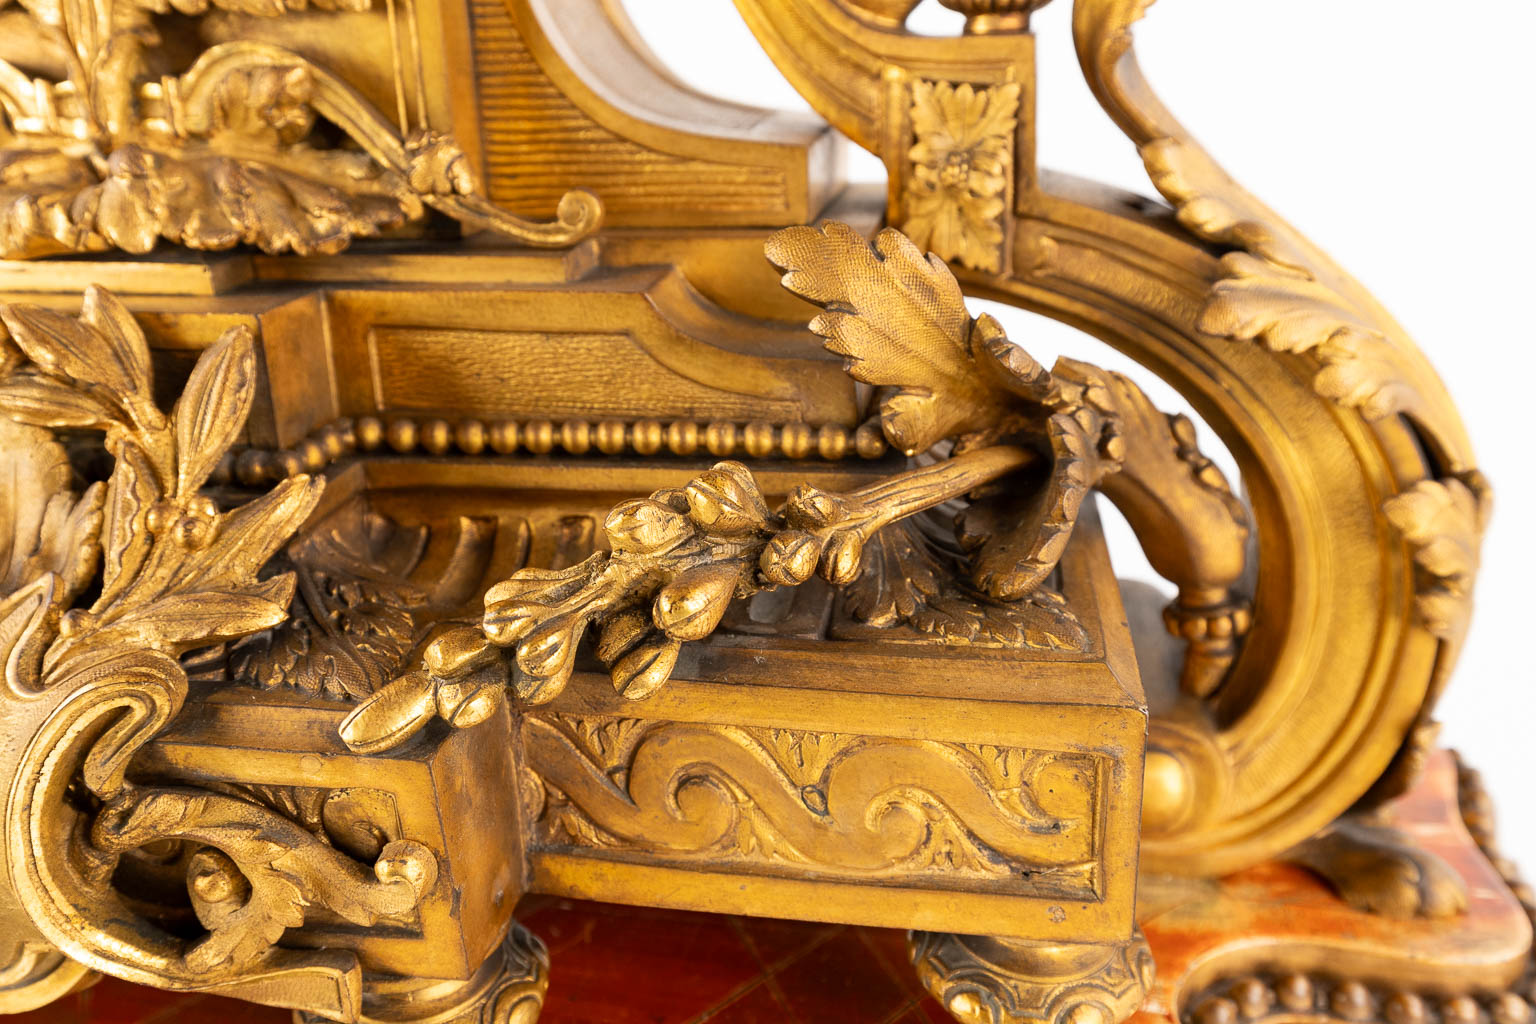 An antique mantle clock, gilt bronze in a Louis XVI style, decorated with ram